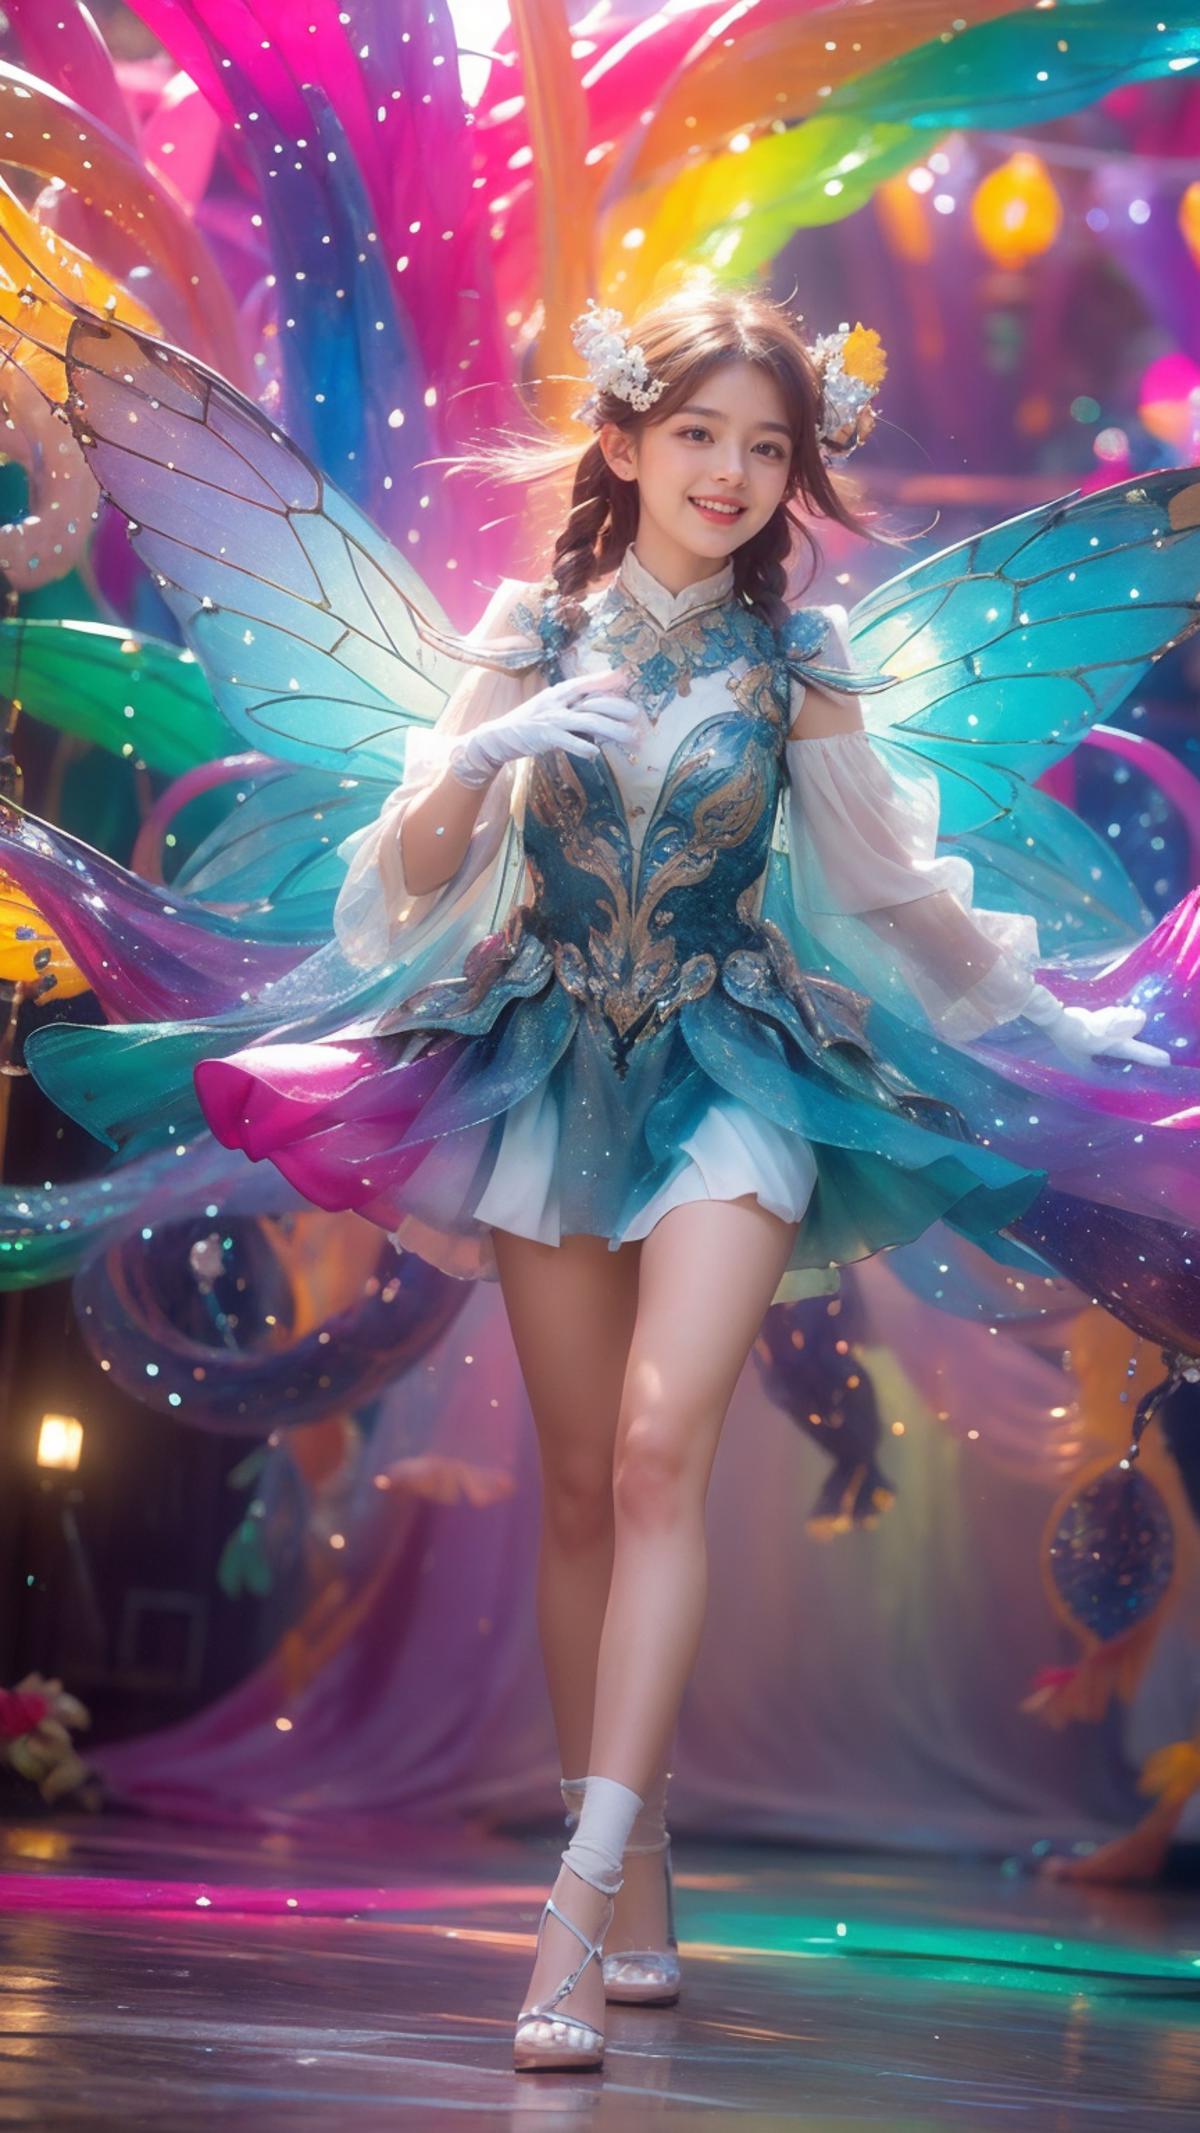 Butterfly fairy image by tonyhs